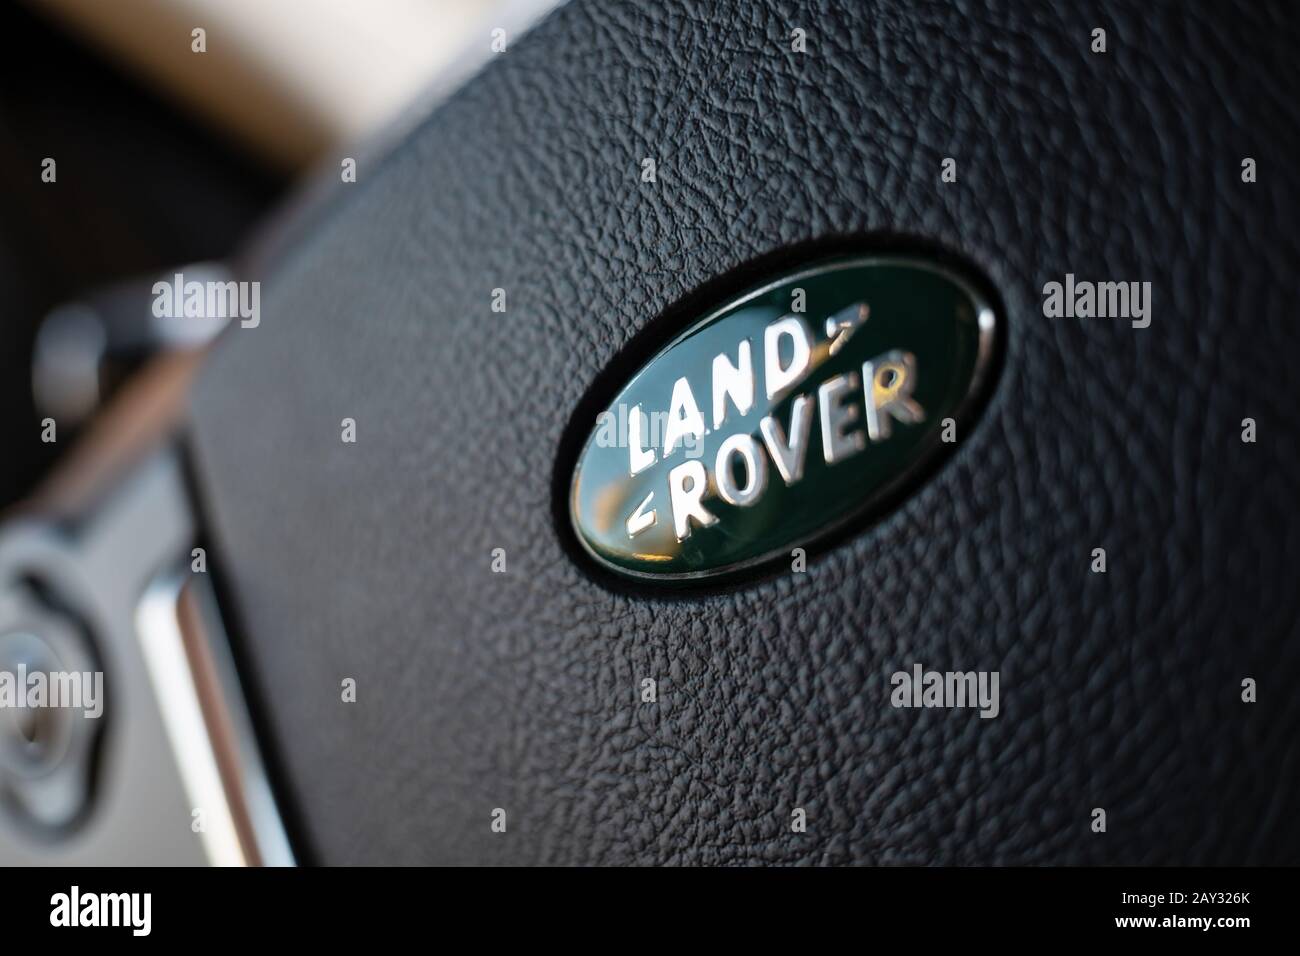 Zurich, Switzerland - November 21, 2019: Land Rover logo on the steering wheel of Discovery SUV Stock Photo